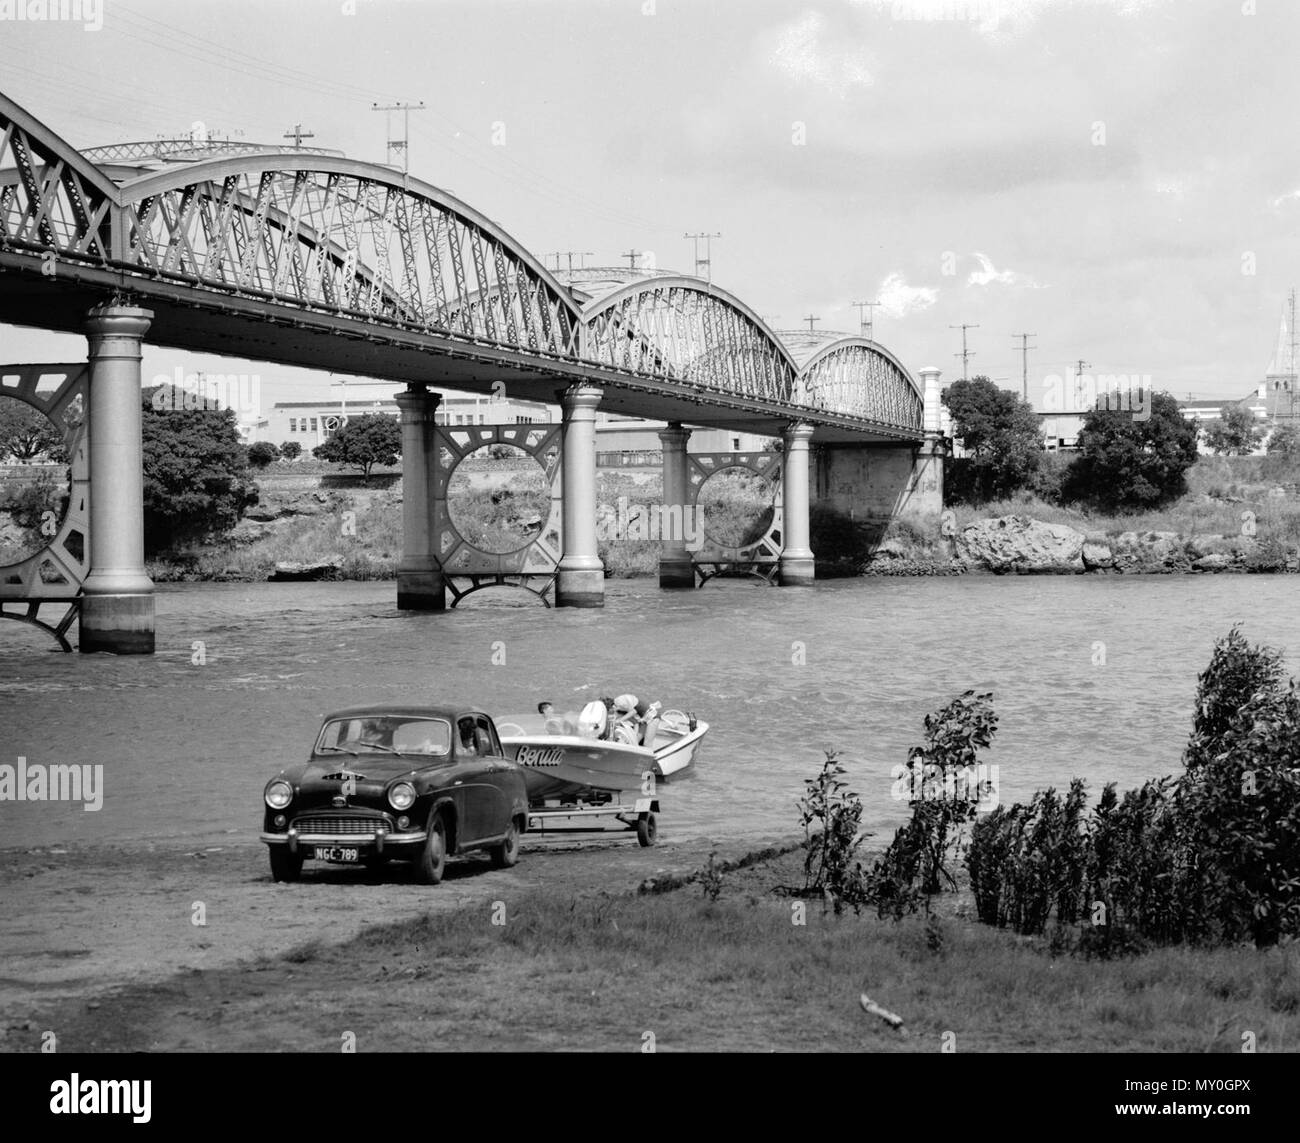 Burnett Bridge, Bundaberg, 1963. From the Queensland Heritage Registerid=600368 ) .  The Burnett Bridge is a metal truss bridge spanning the Burnett River at Bundaberg, linking the two sections of the city. It was constructed in 1900 to the design of A.B. Brady.  The Burnett area was first settled by Europeans in the 1840s and 50s as a series of pastoral runs. In the late 1860s, as good agricultural land around Maryborough began to be scarce, agriculturalists and timbergetters became interested in land on the navigable Burnett River to the north. The foundation settlers of Bundaberg selected l Stock Photo